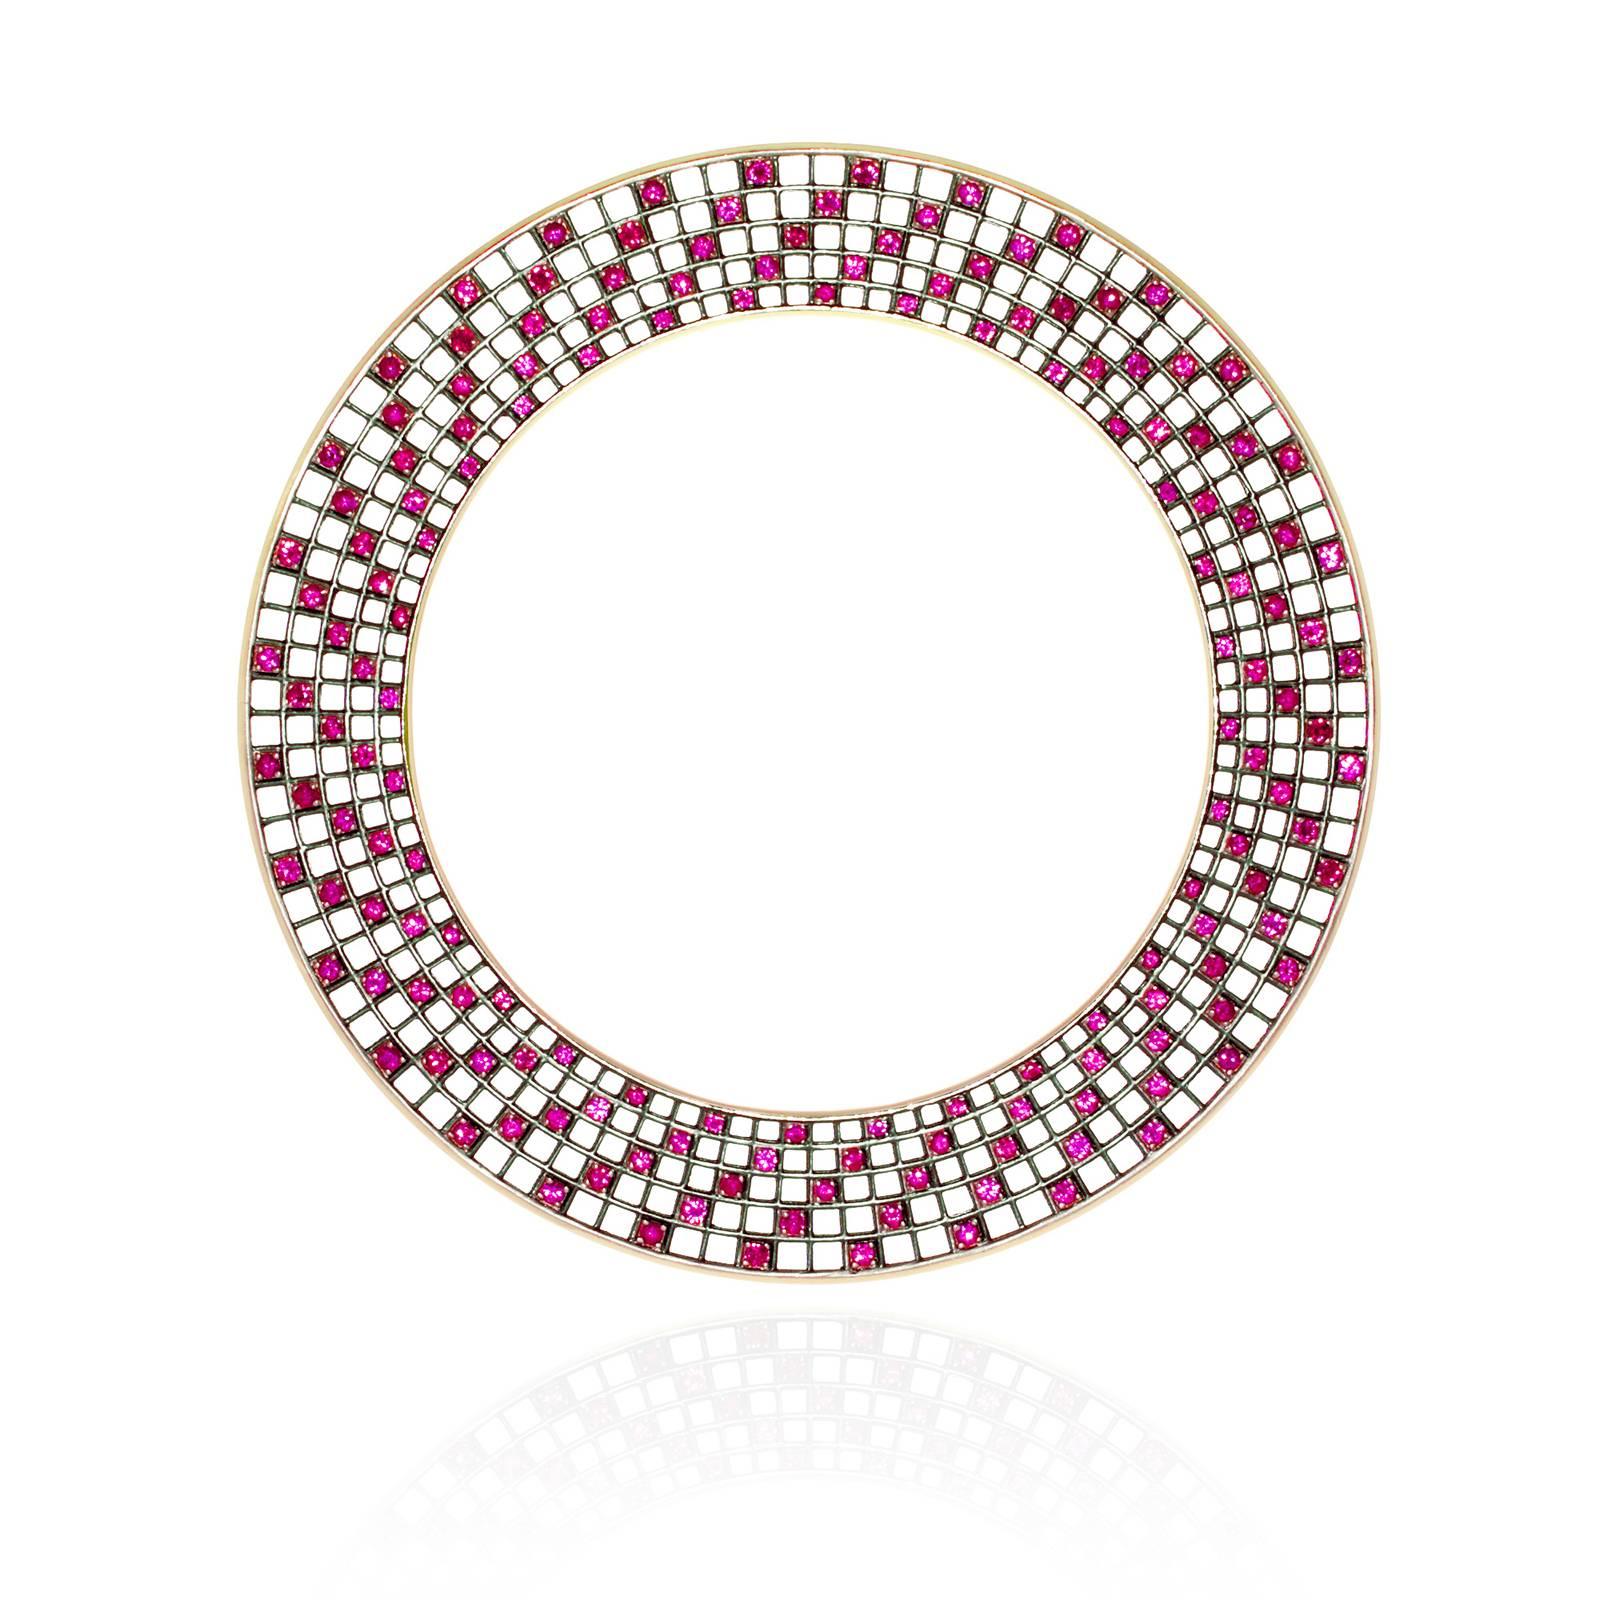 From the Wired Collection, a disc-shaped bangle with rubies (10 cts) set in a spiral pattern on a blackened 18k yellow gold grid. Exterior and interior edges are polished 18k yellow gold. Double-sided. Height 14mm or approx 1/2